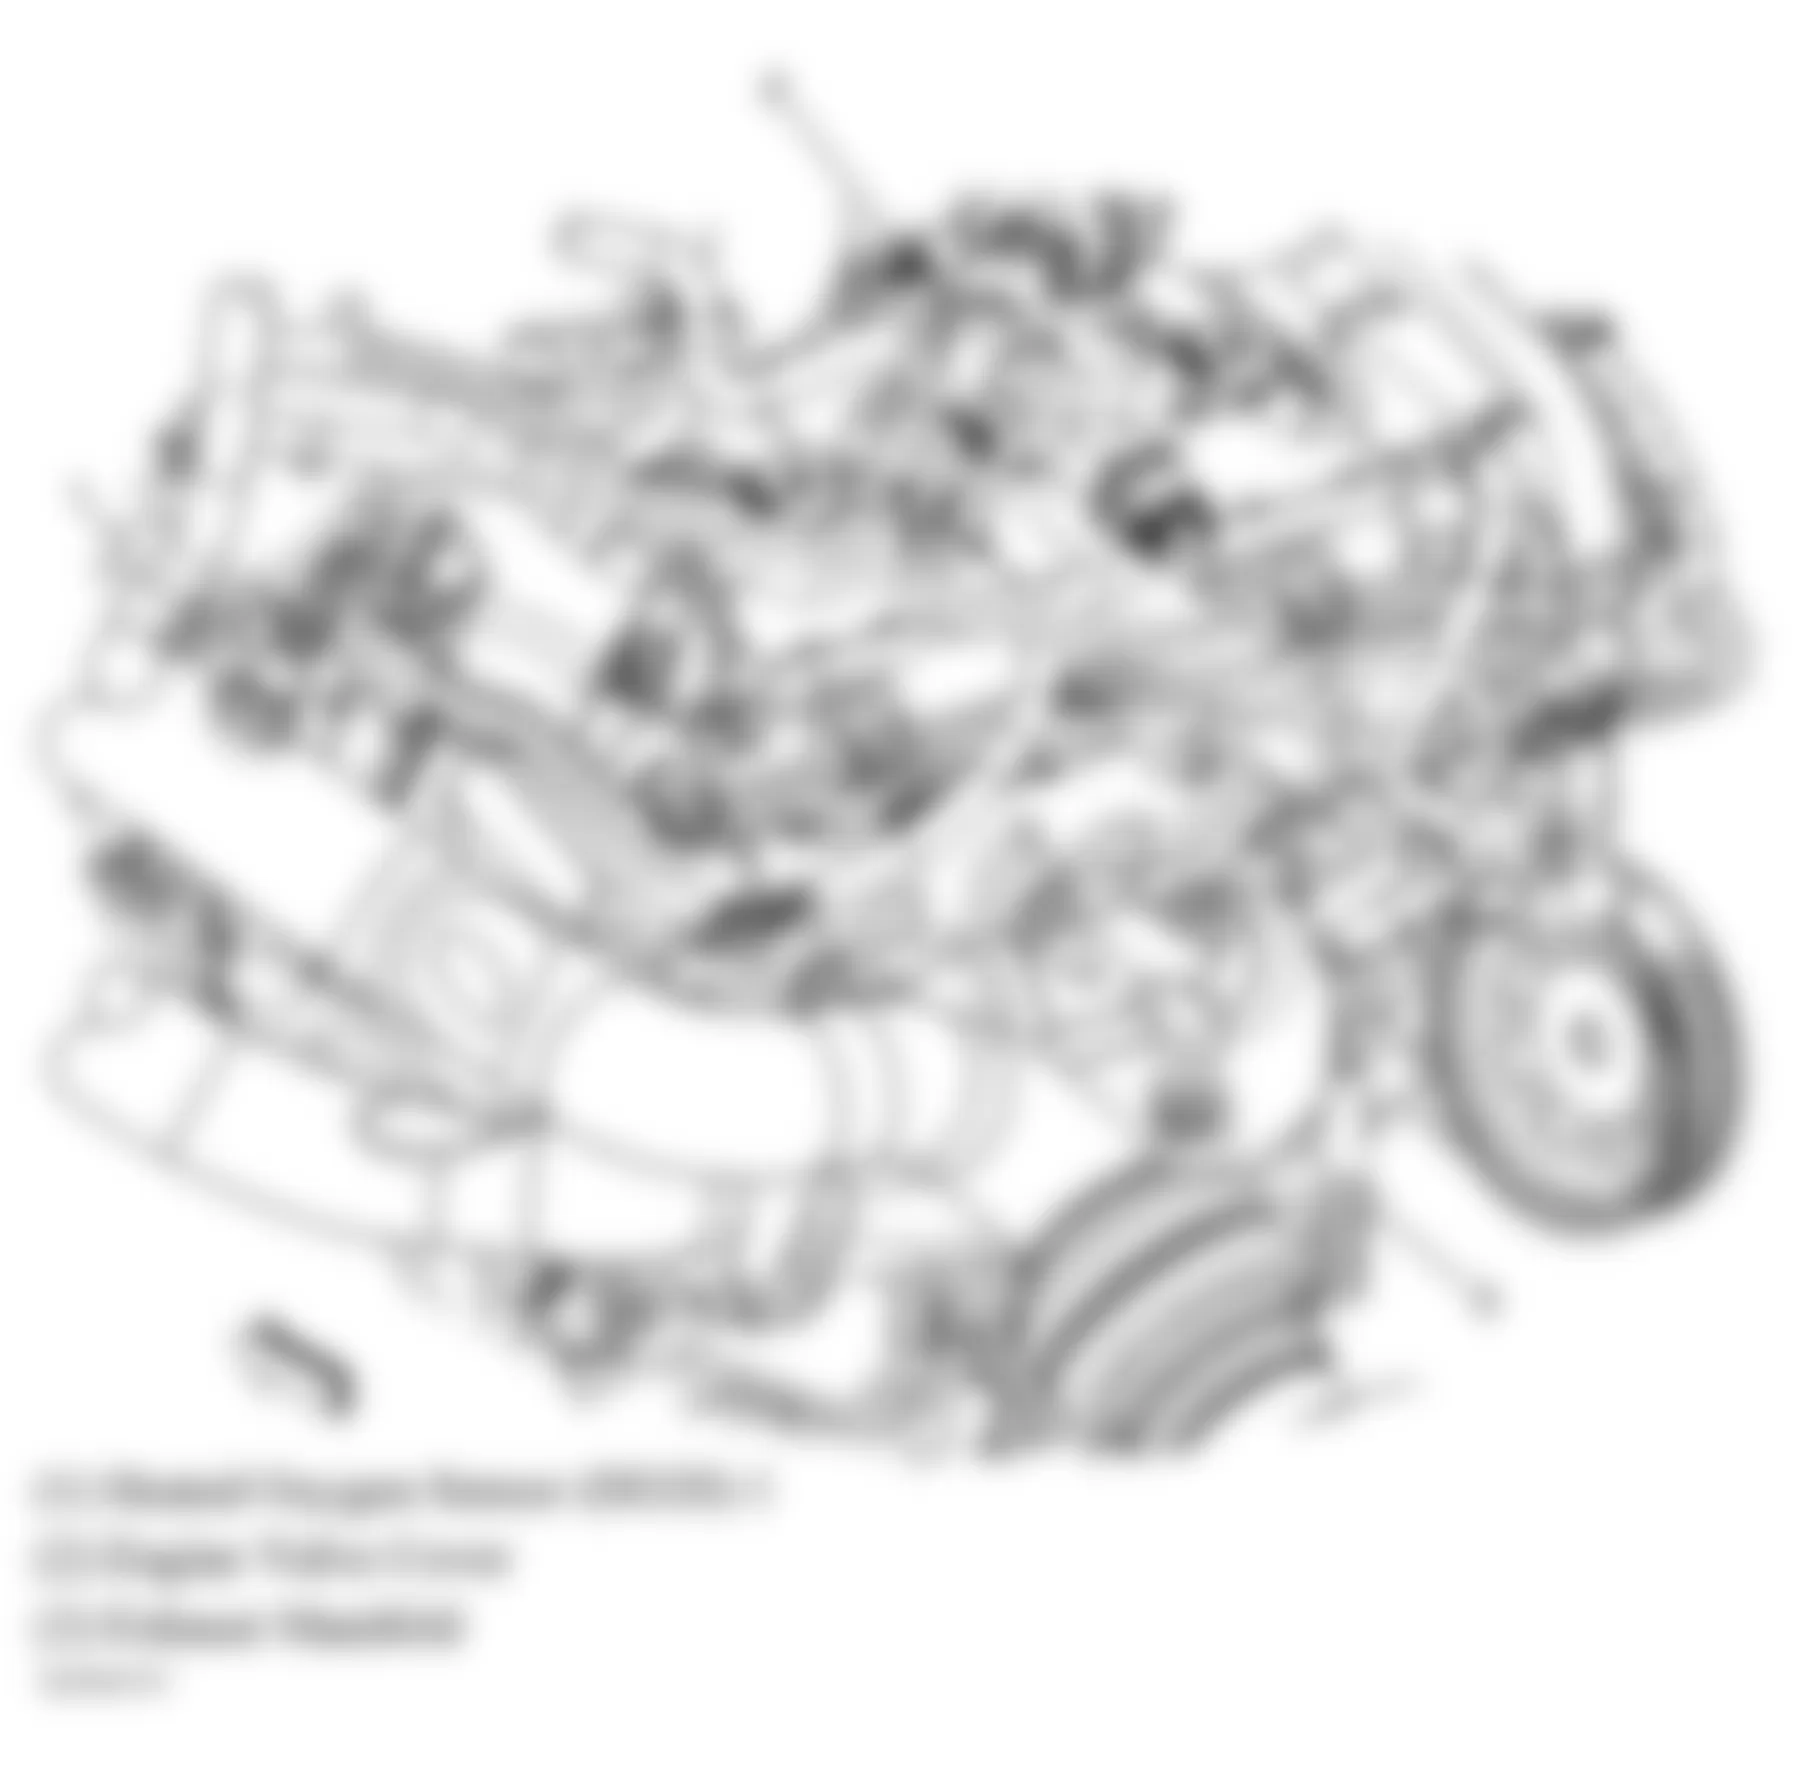 Buick Allure CXL 2008 - Component Locations -  Right Rear Of Engine (3.6L)